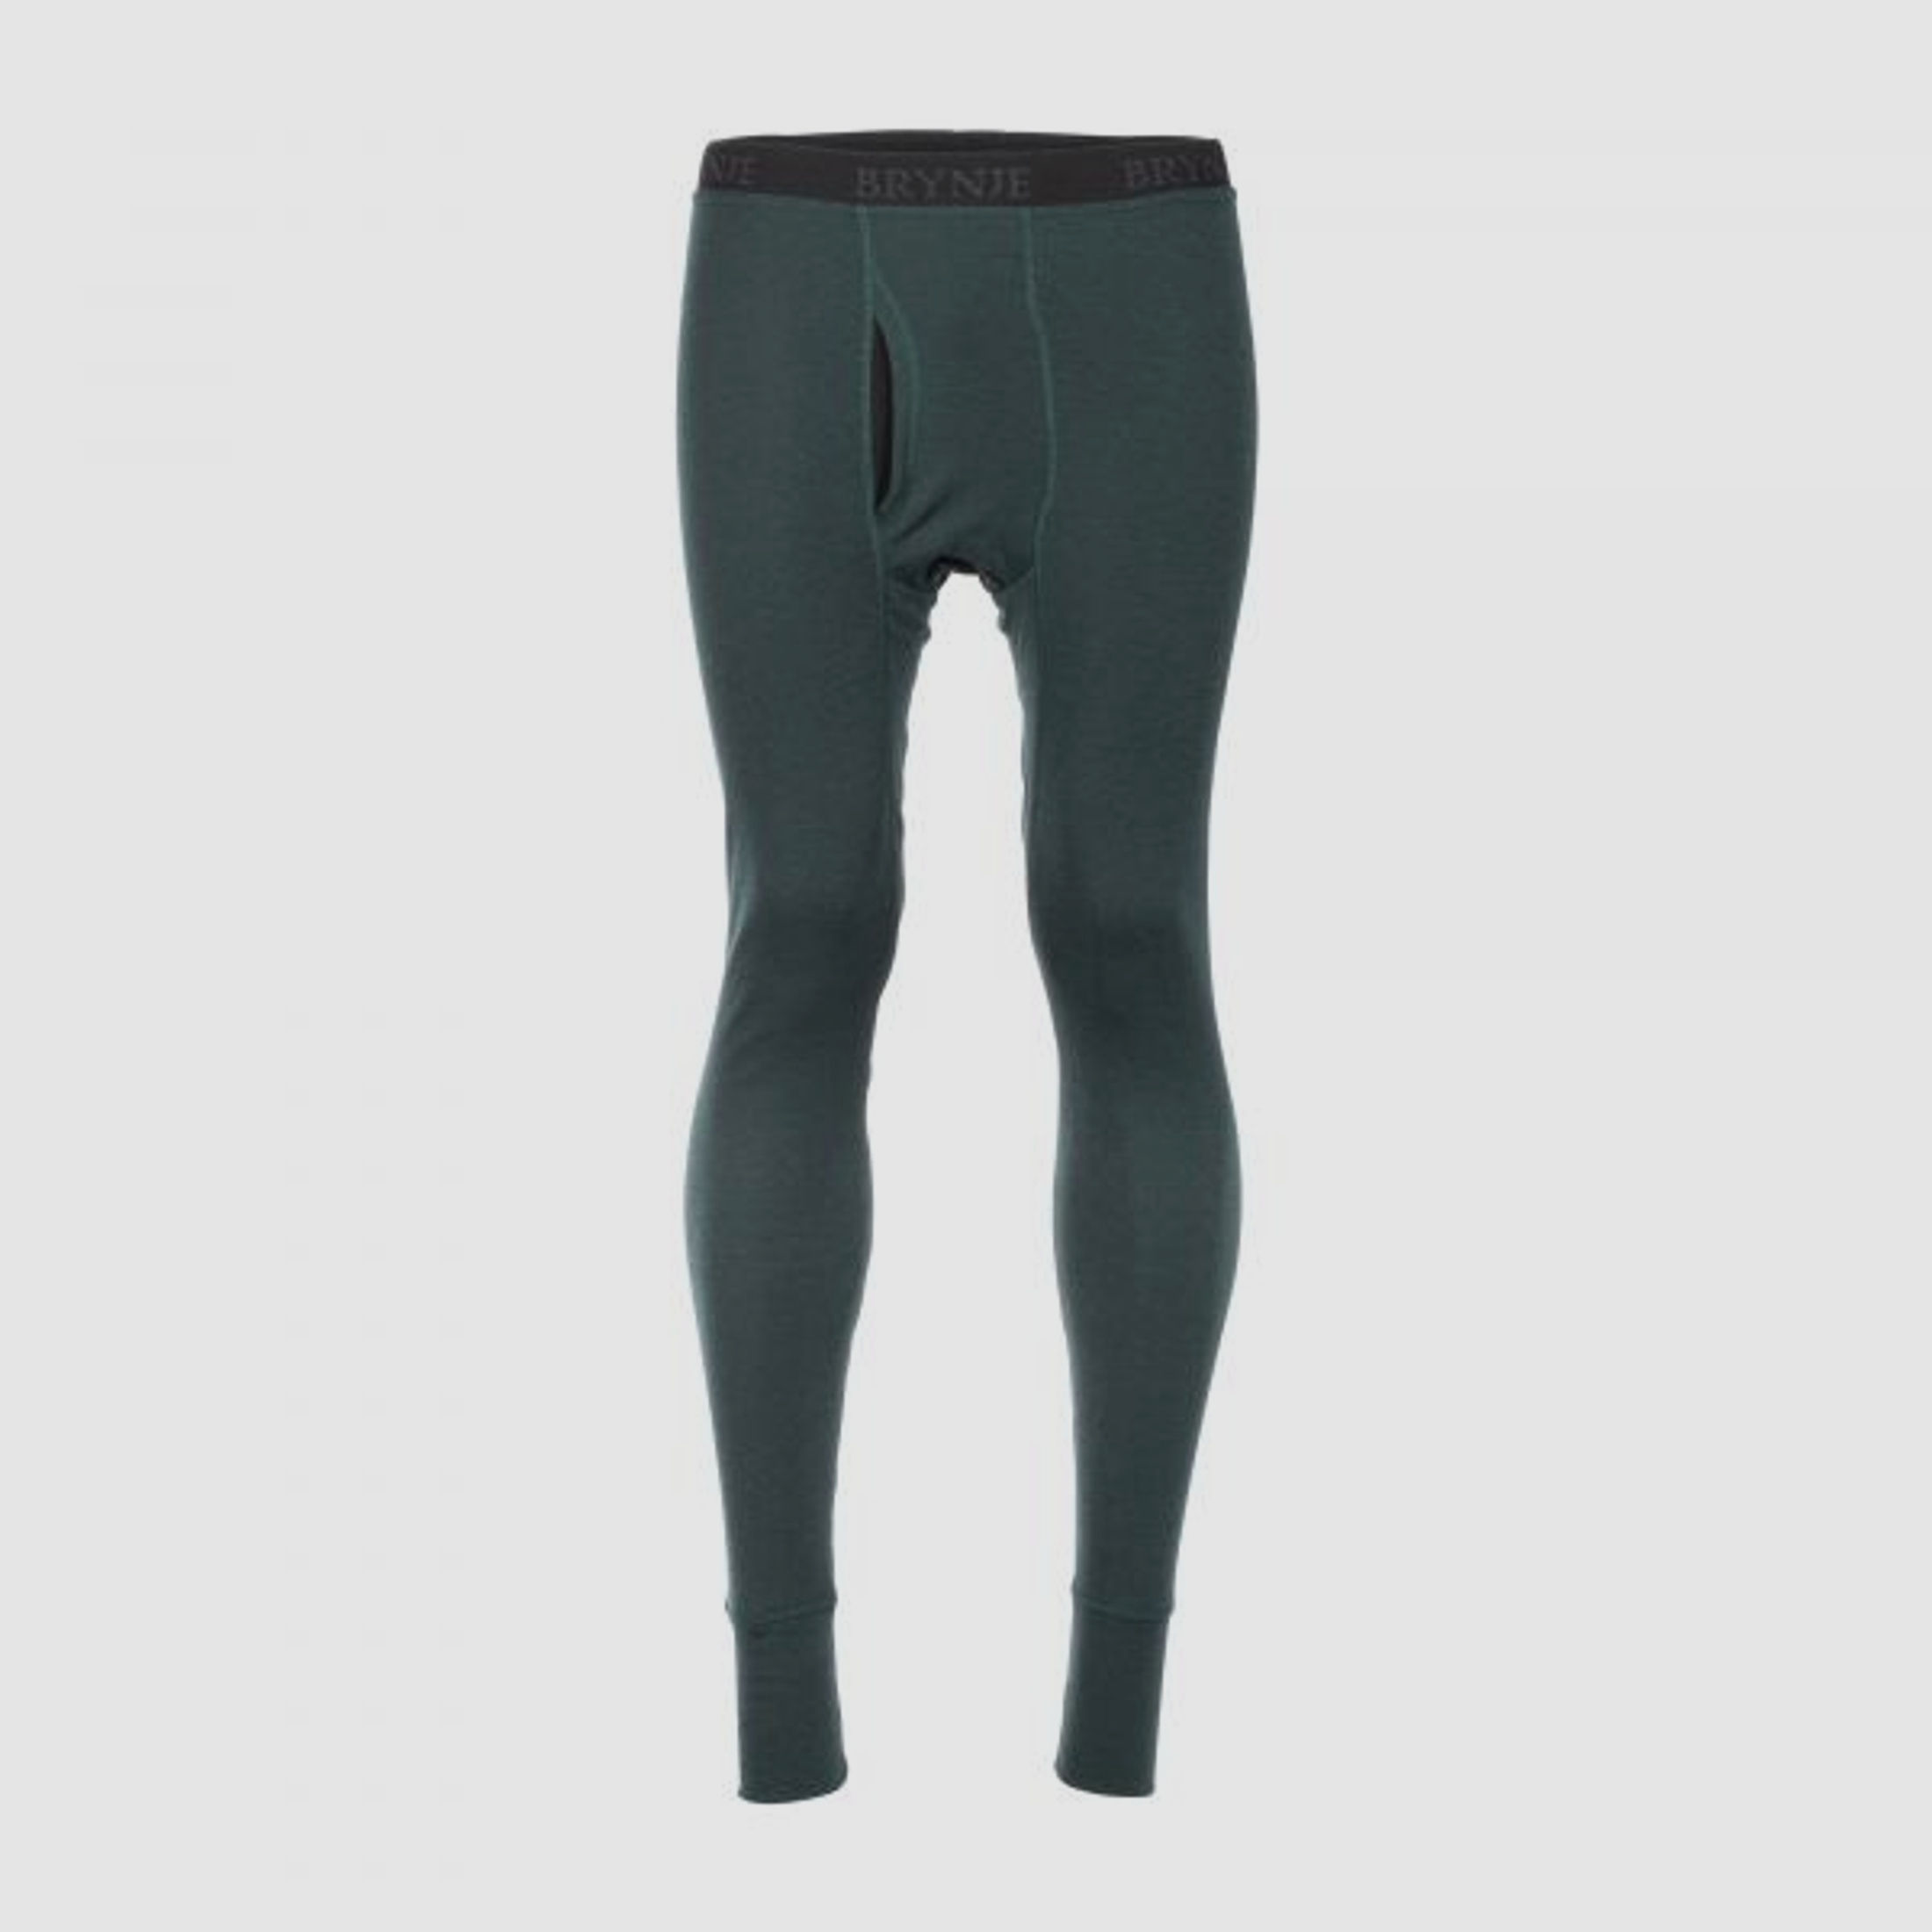 Brynje Brynje Thermohose Arctic Double lang mit Eingriff oliv